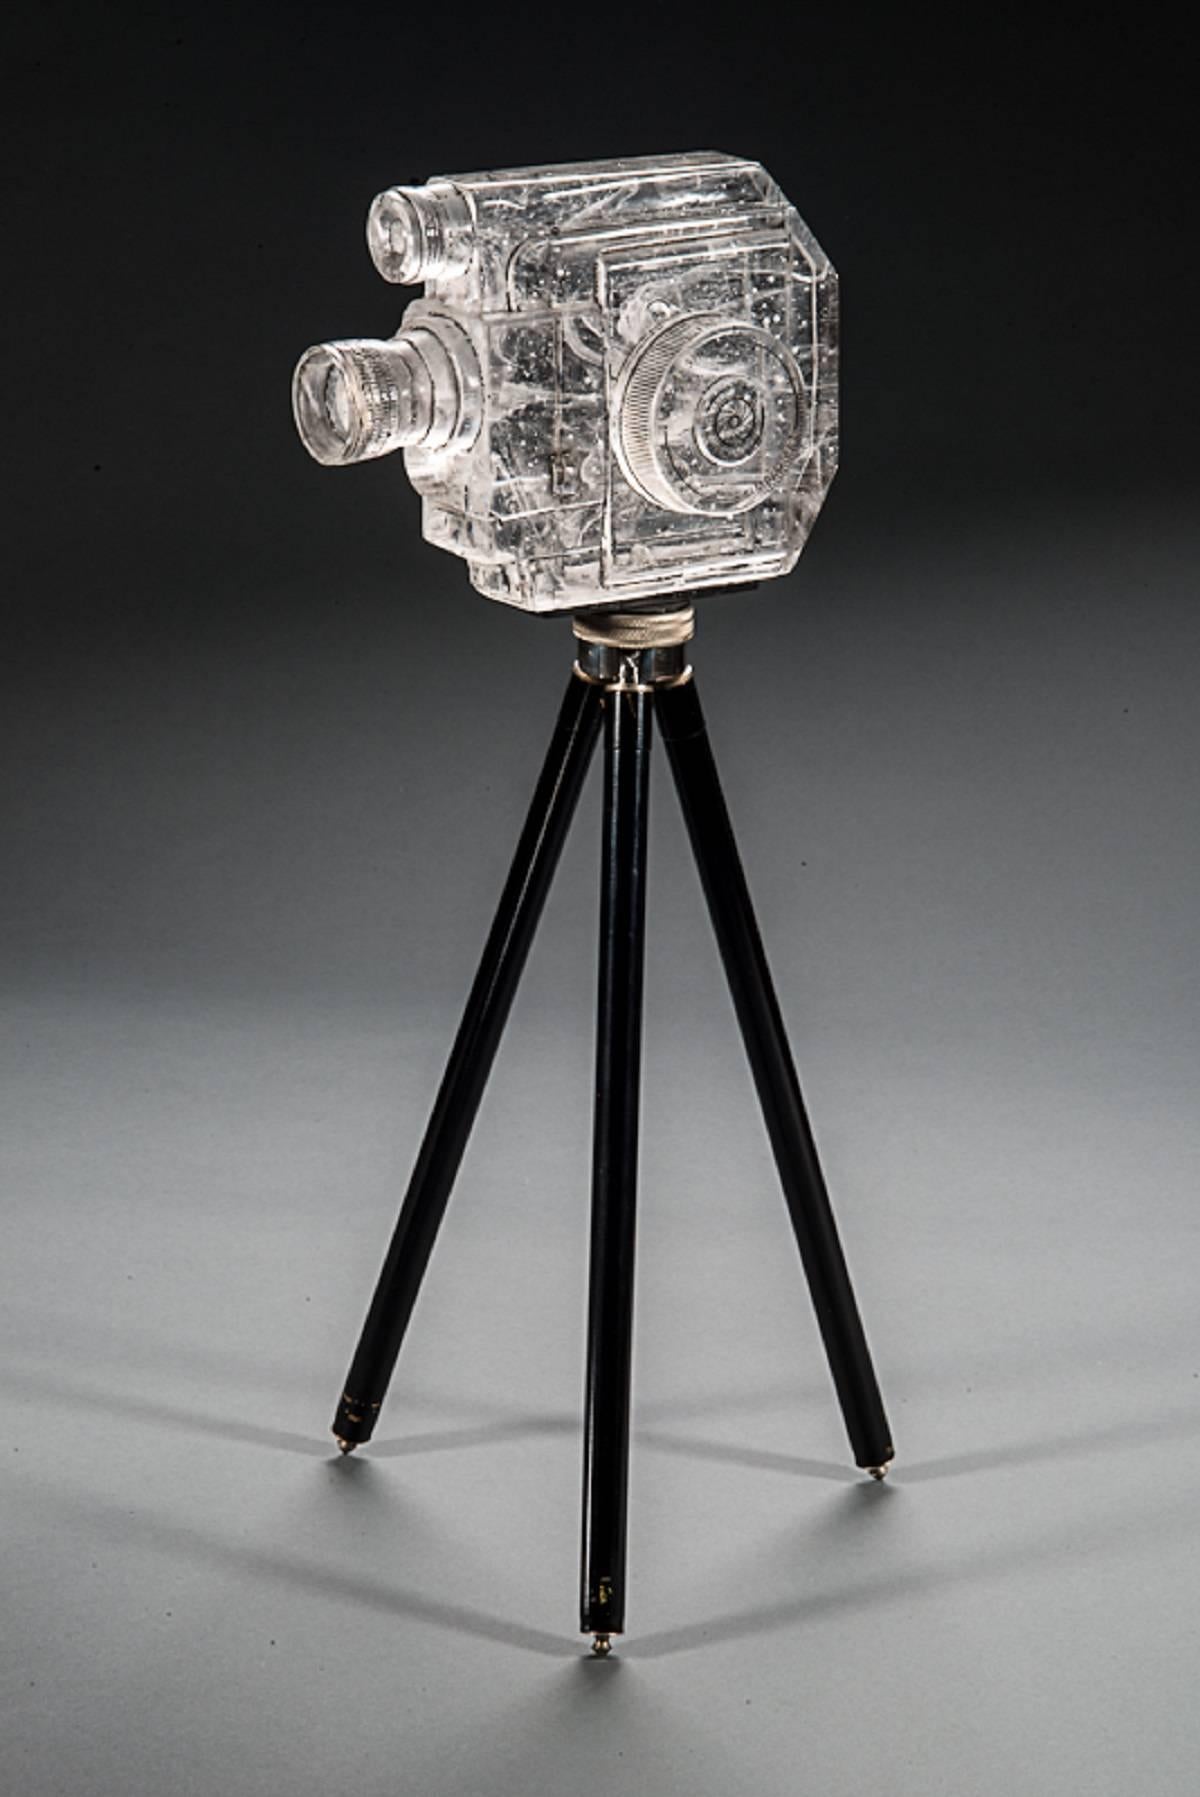 Josh Hershman is acutely aware of the curious nature of light reflection and refraction within his amazing camera sculptures. In his works, he explores the relationship between vision, light, and the photographic process. Using cast and polished